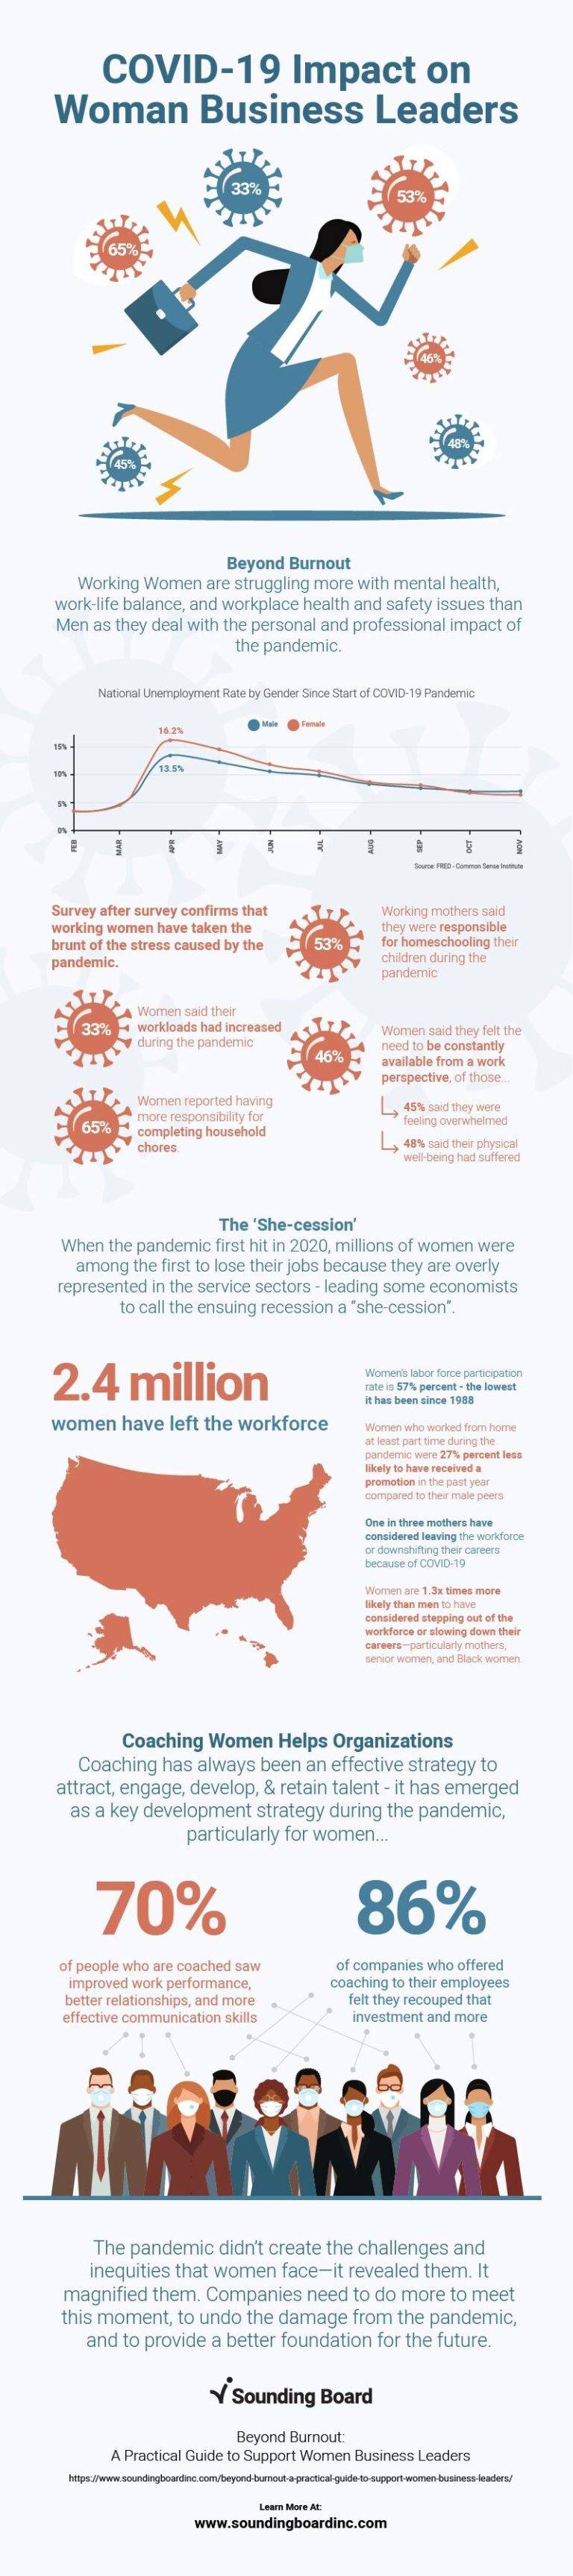 Infographic: COVID-19 Impact on Women Business Leaders 1